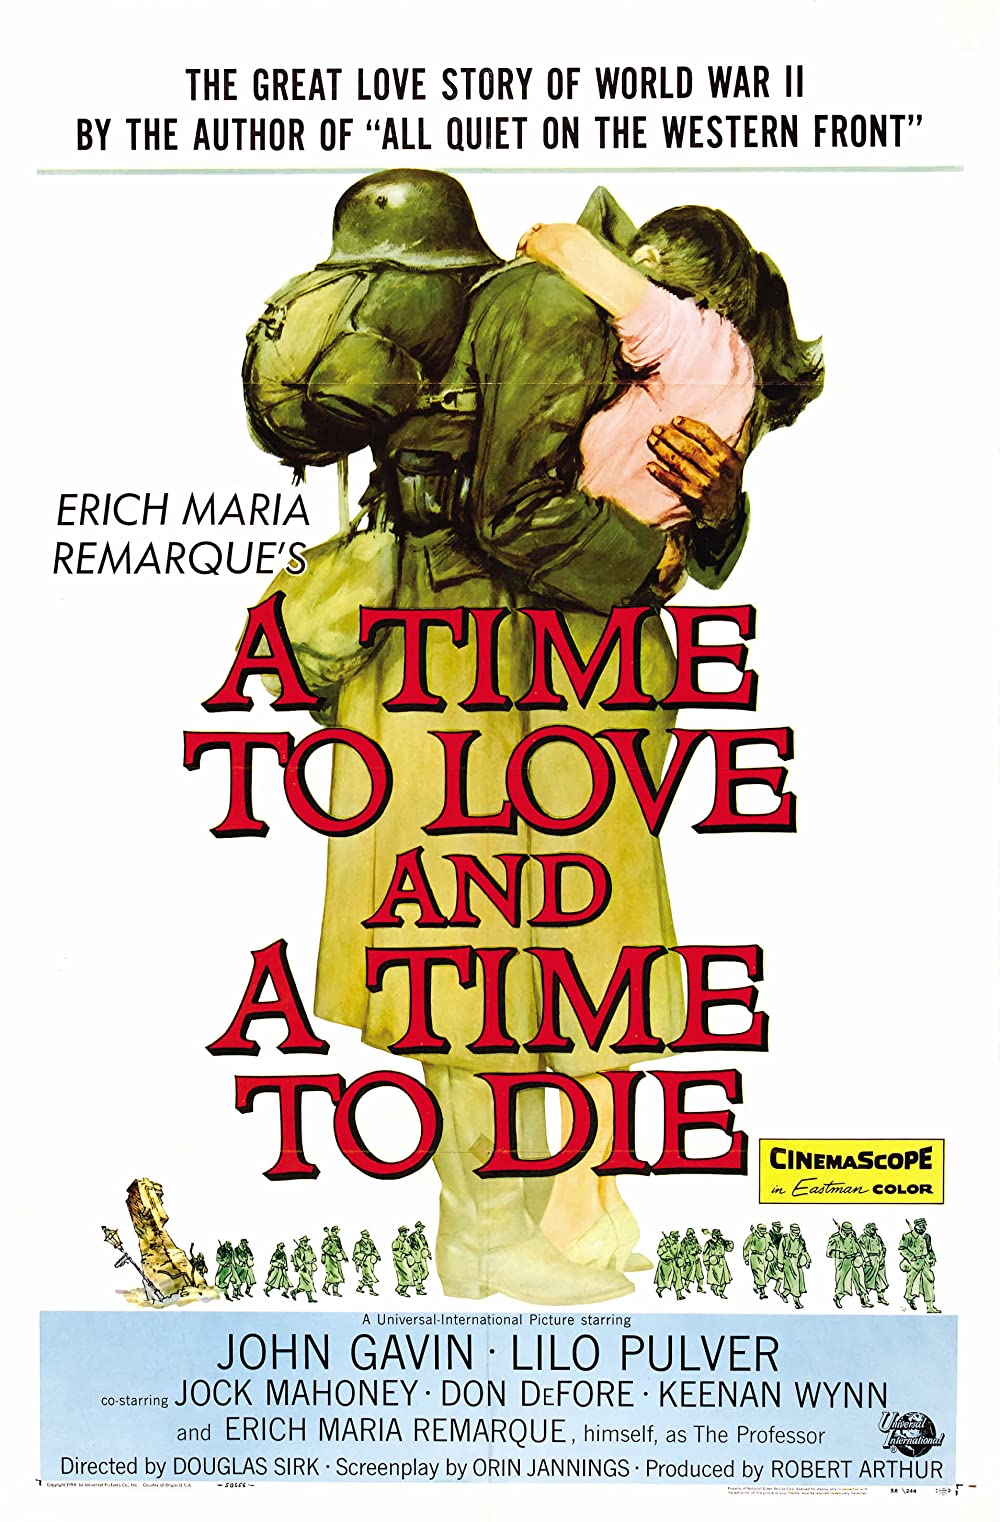 Filmbeschreibung zu A Time to Love and a Time to Die